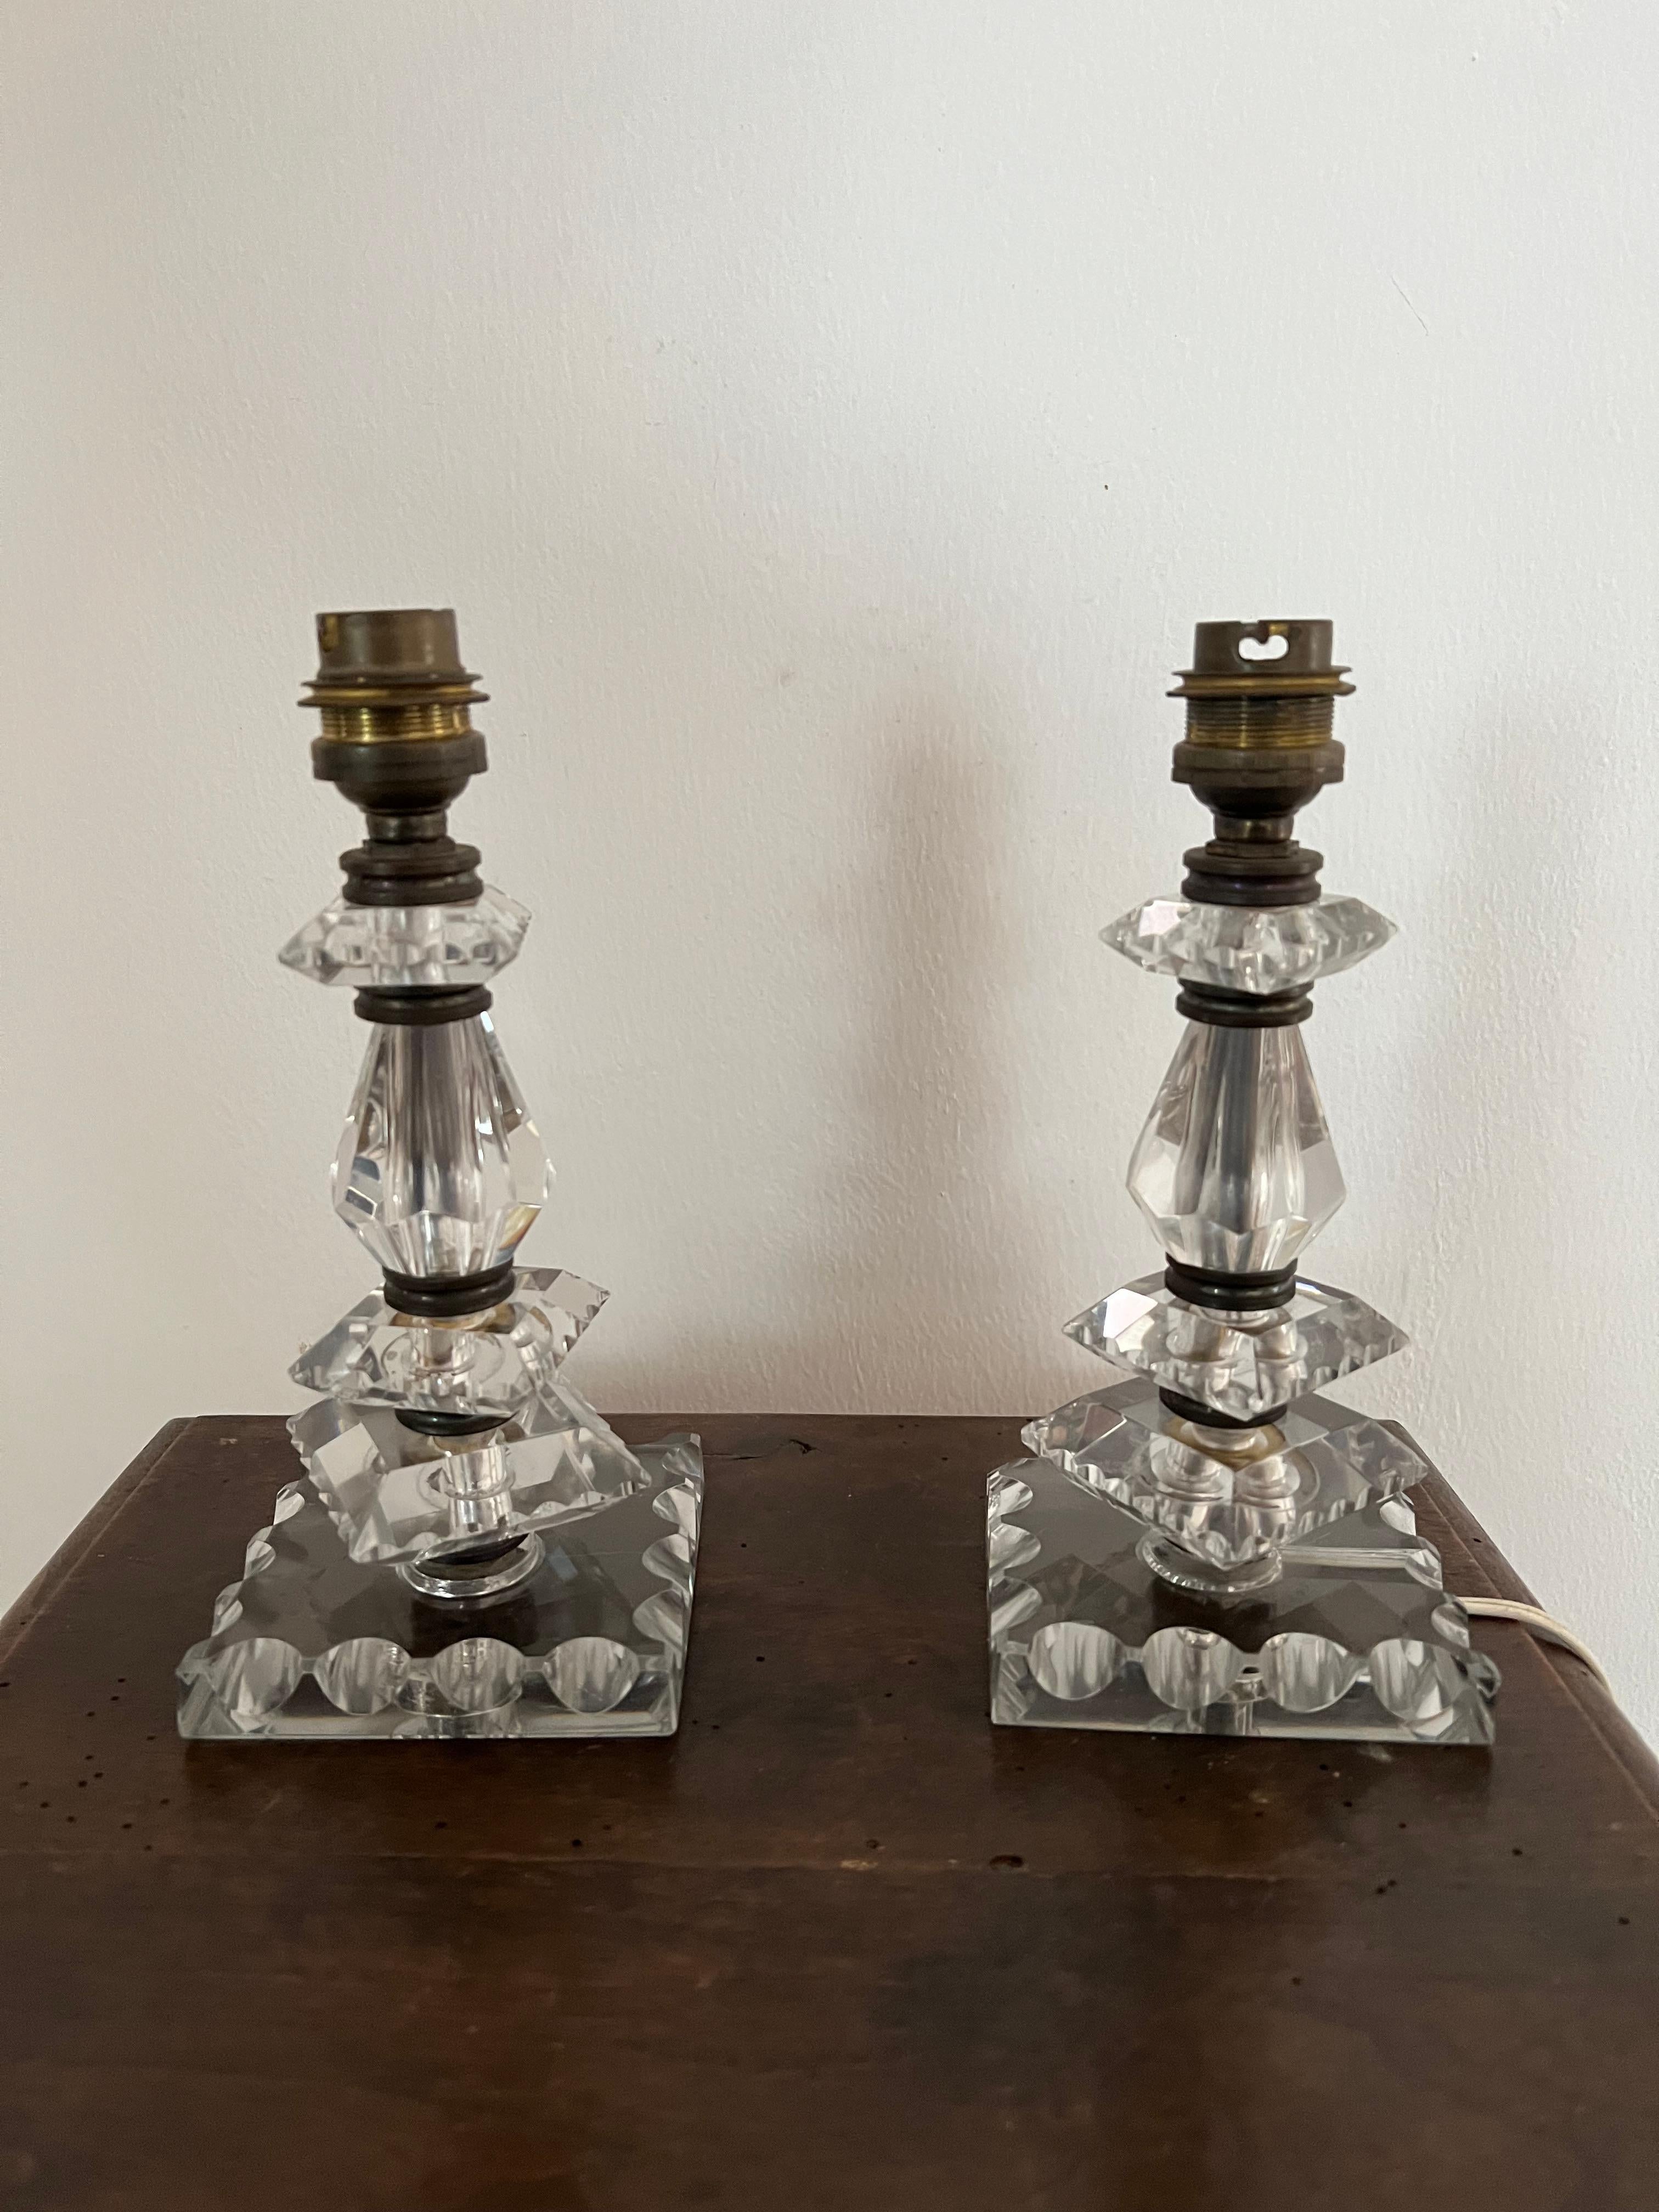 Beautiful pair of table lamps by Baccarat, France in hand cut Lead glass, circa 1940.
The pieces 